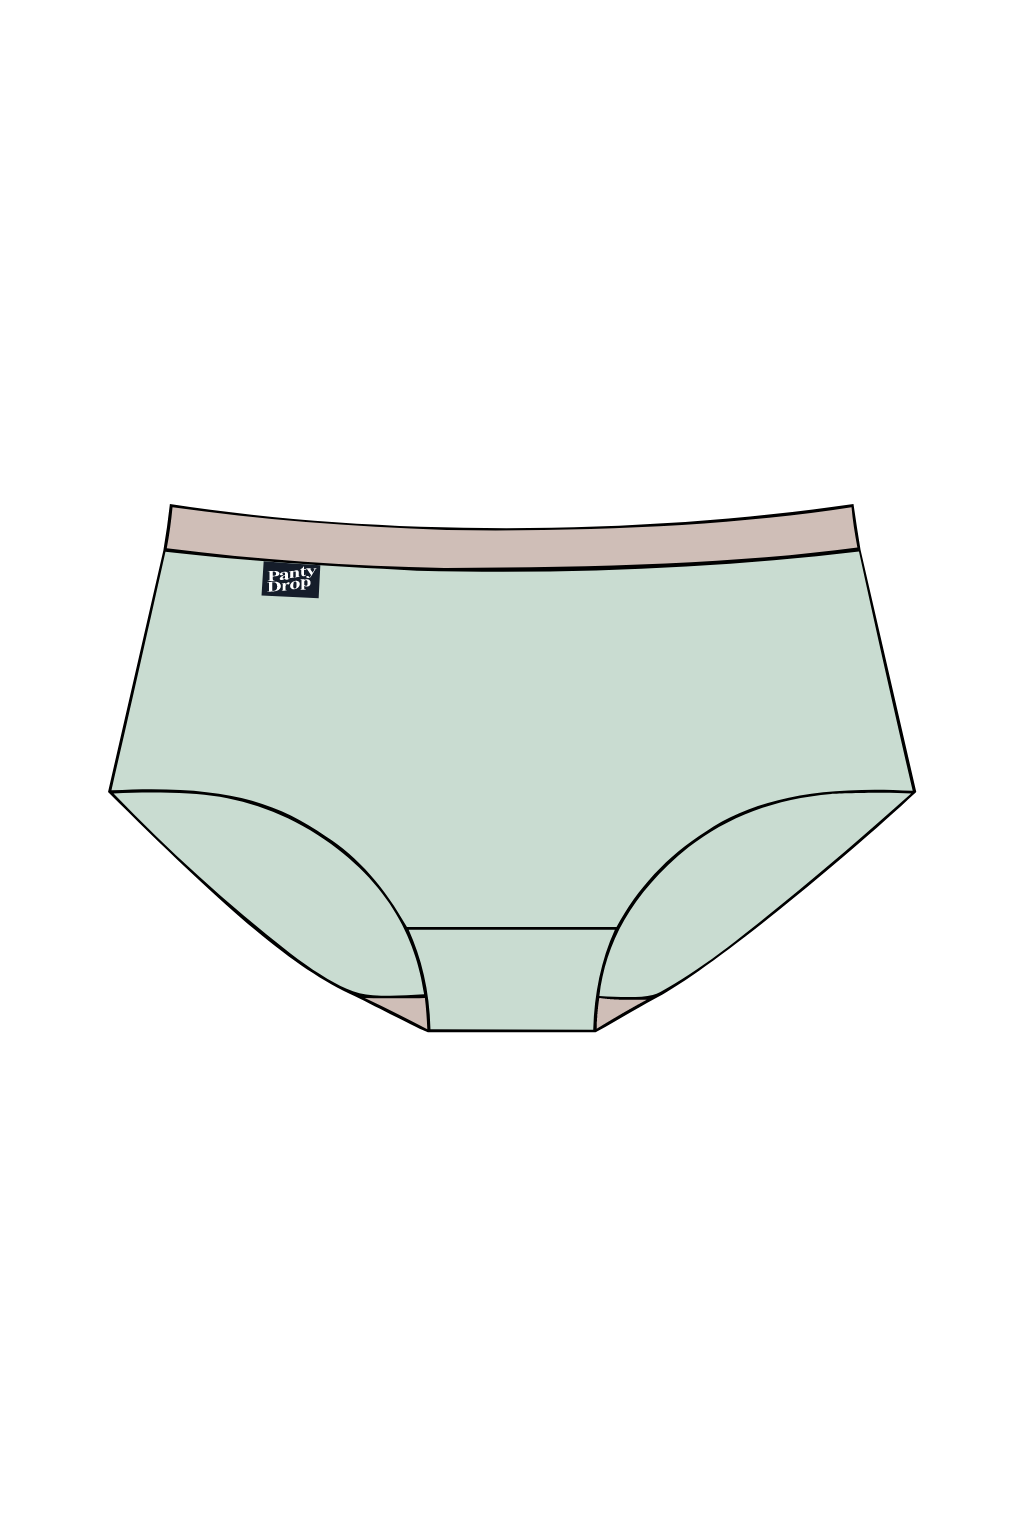 Perfect Panty v2 - Previous Colors